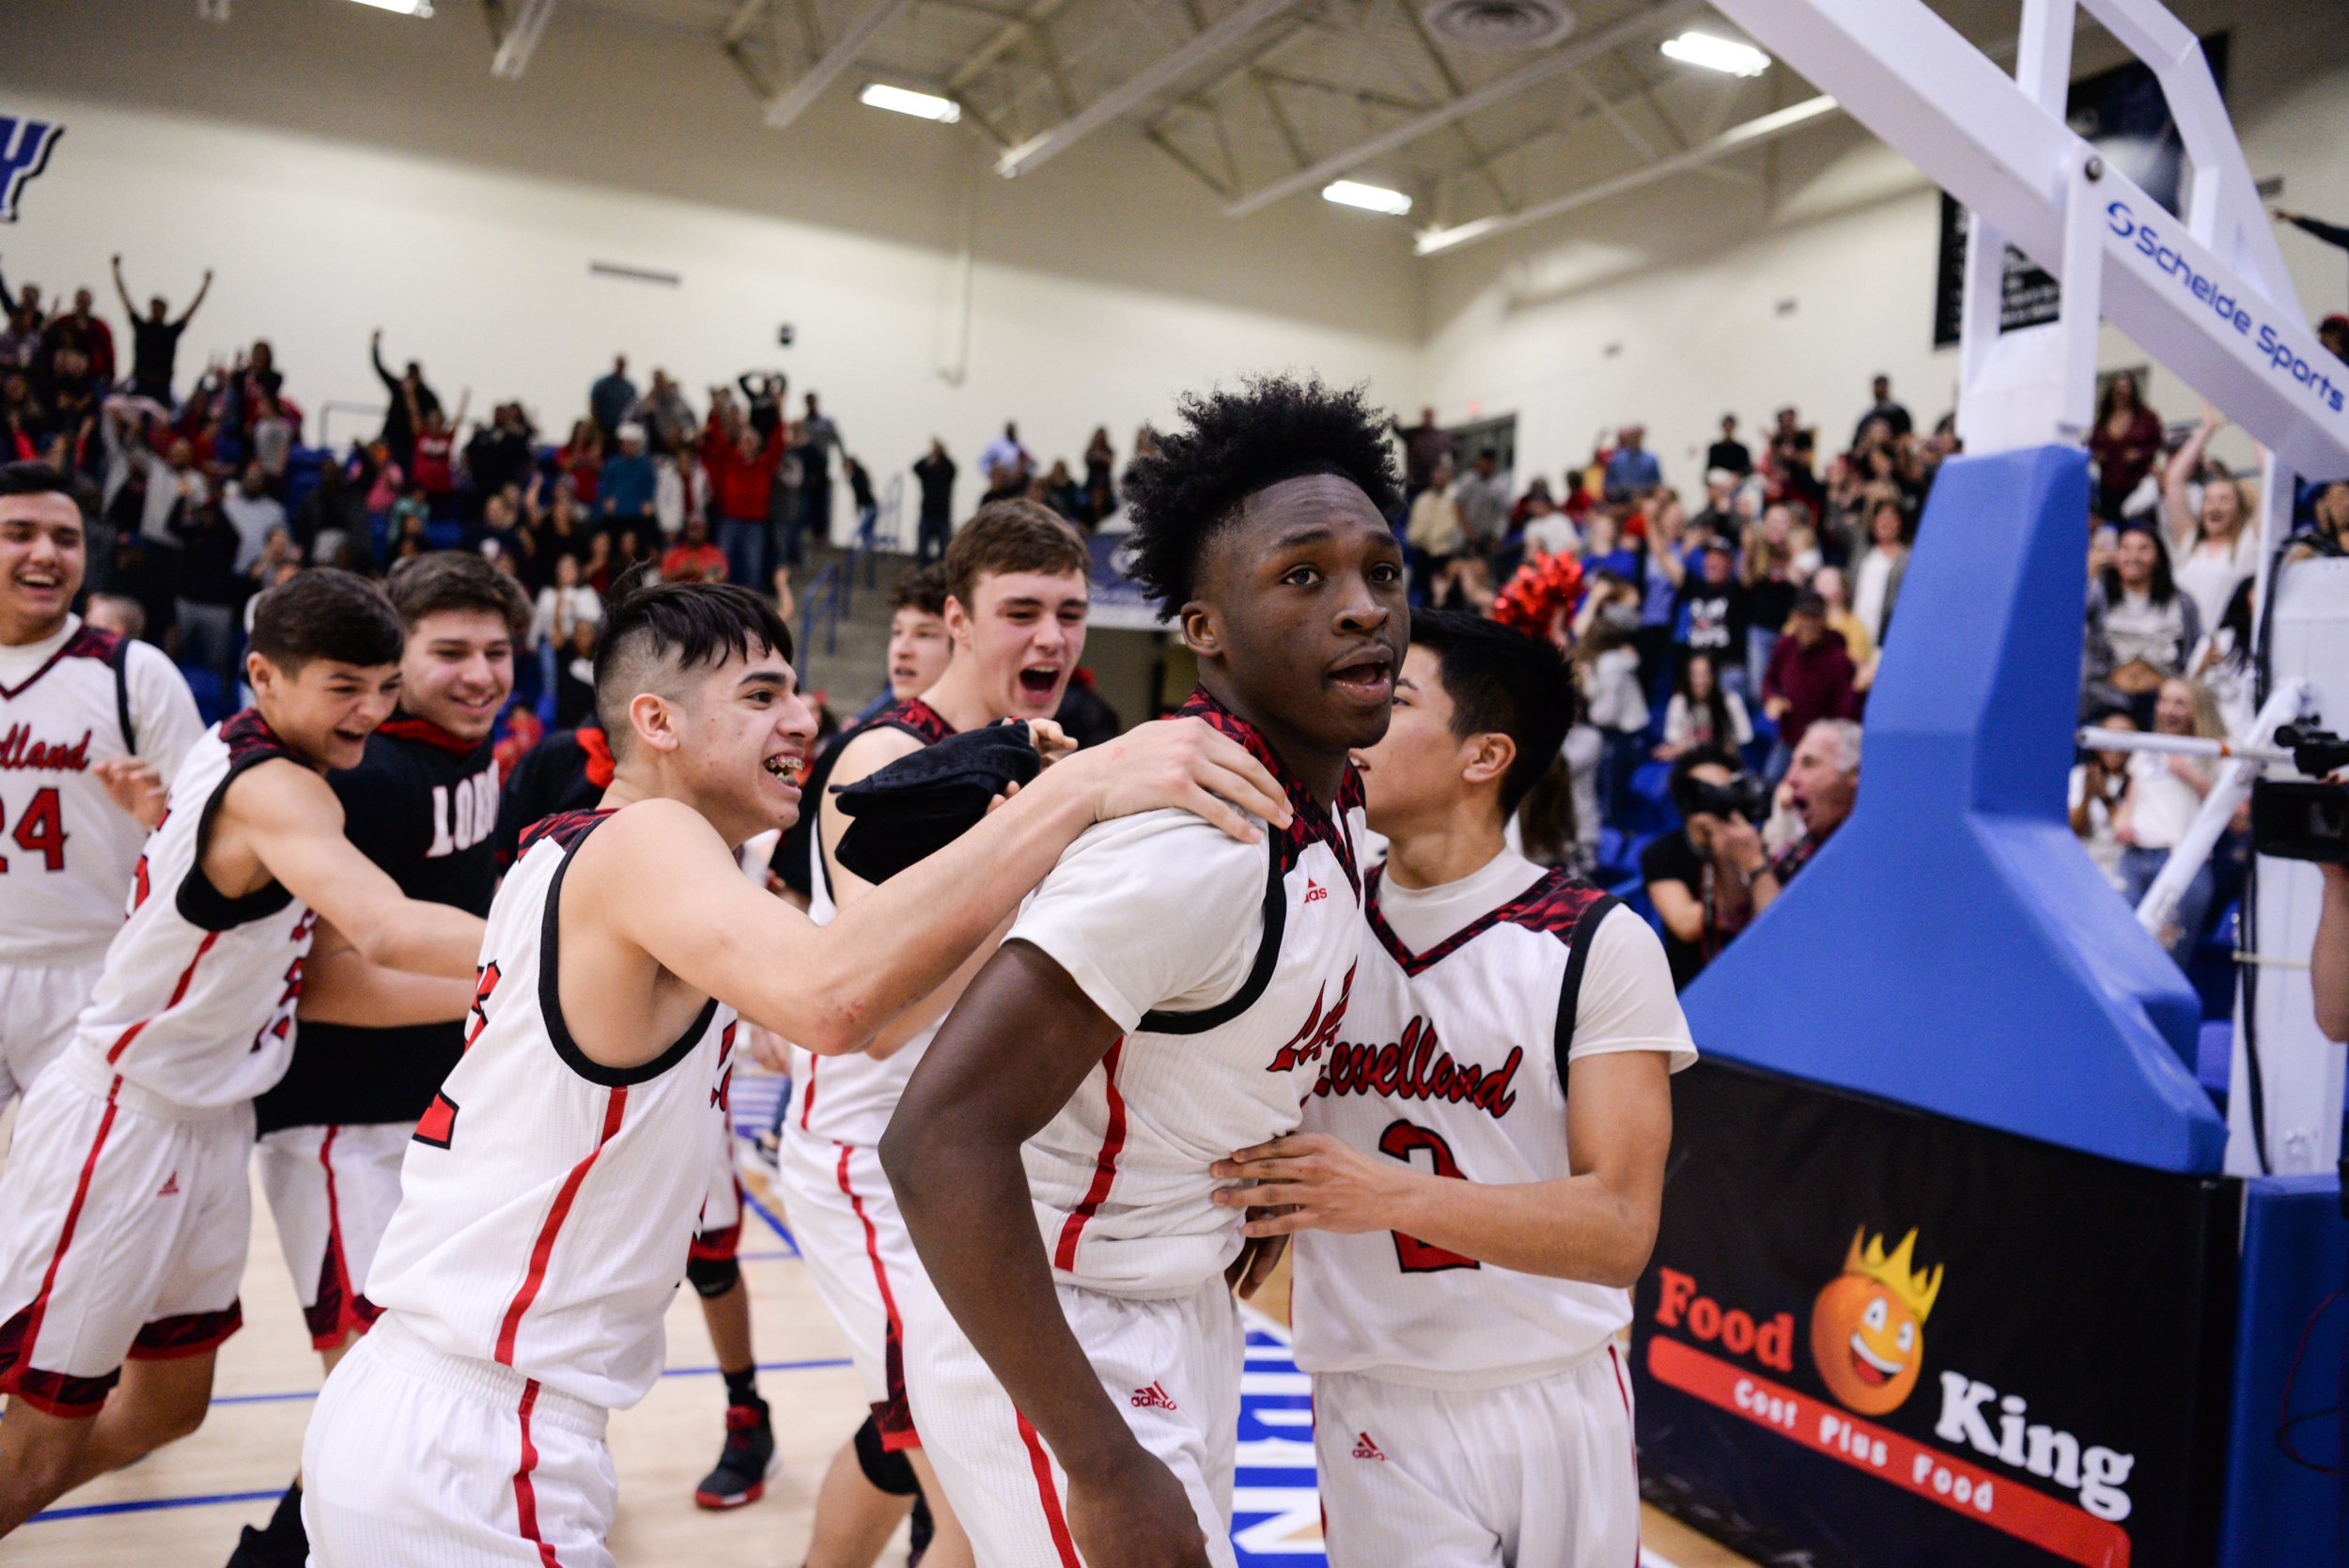  The Levelland team storms the court and teammate Jakeevian Ford (4) after he scored the buzzer-beater shot to win the Region 1 4A regional semifinal game 48-46 against Graham Tuesday, March 1, 2019 at Rip Griffin Center in Lubbock, TX. Levelland wil